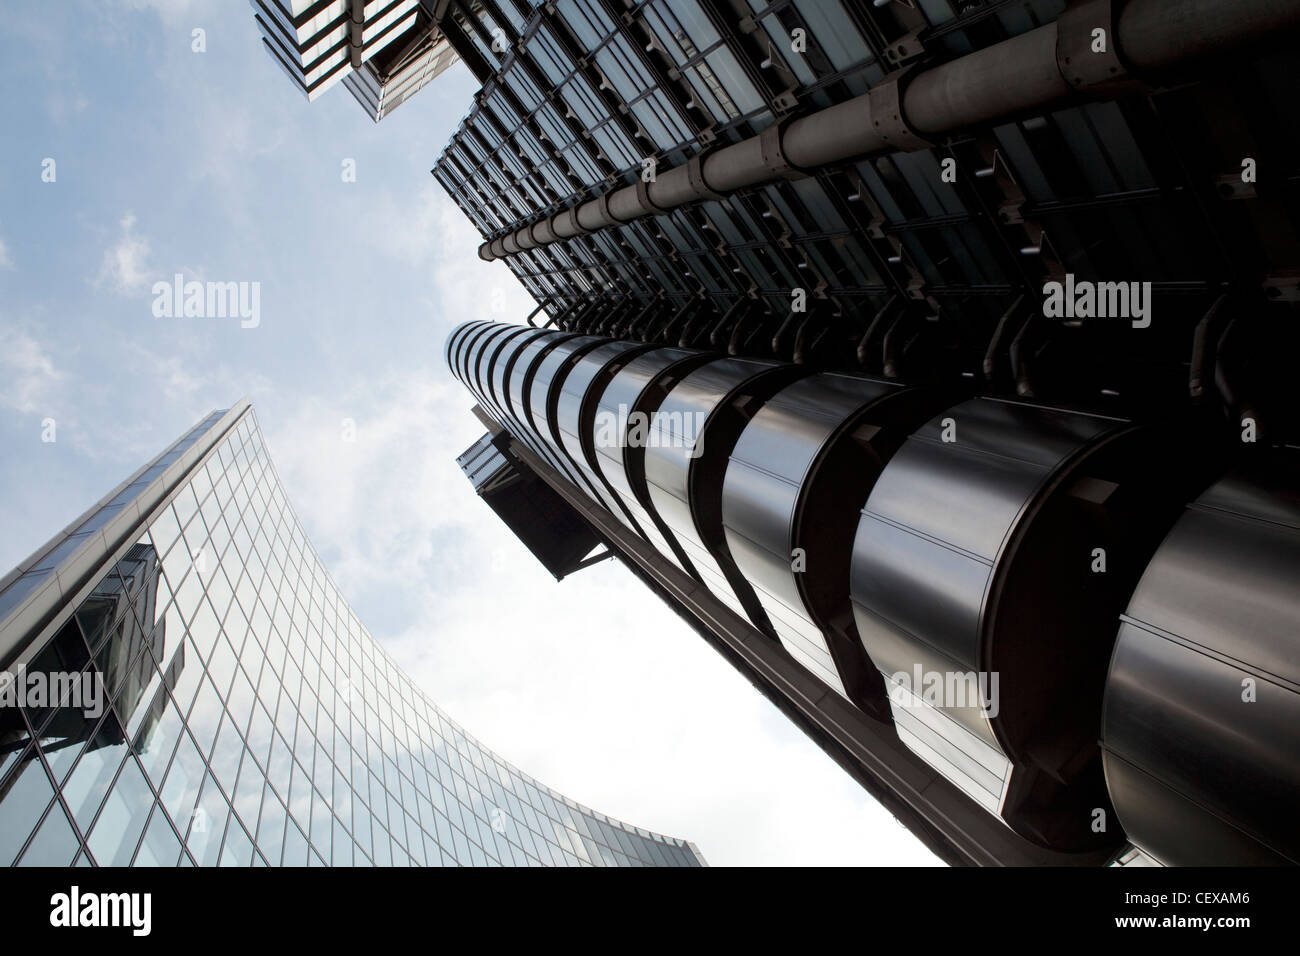 A view of the Lloyds building in the City of London Stock Photo